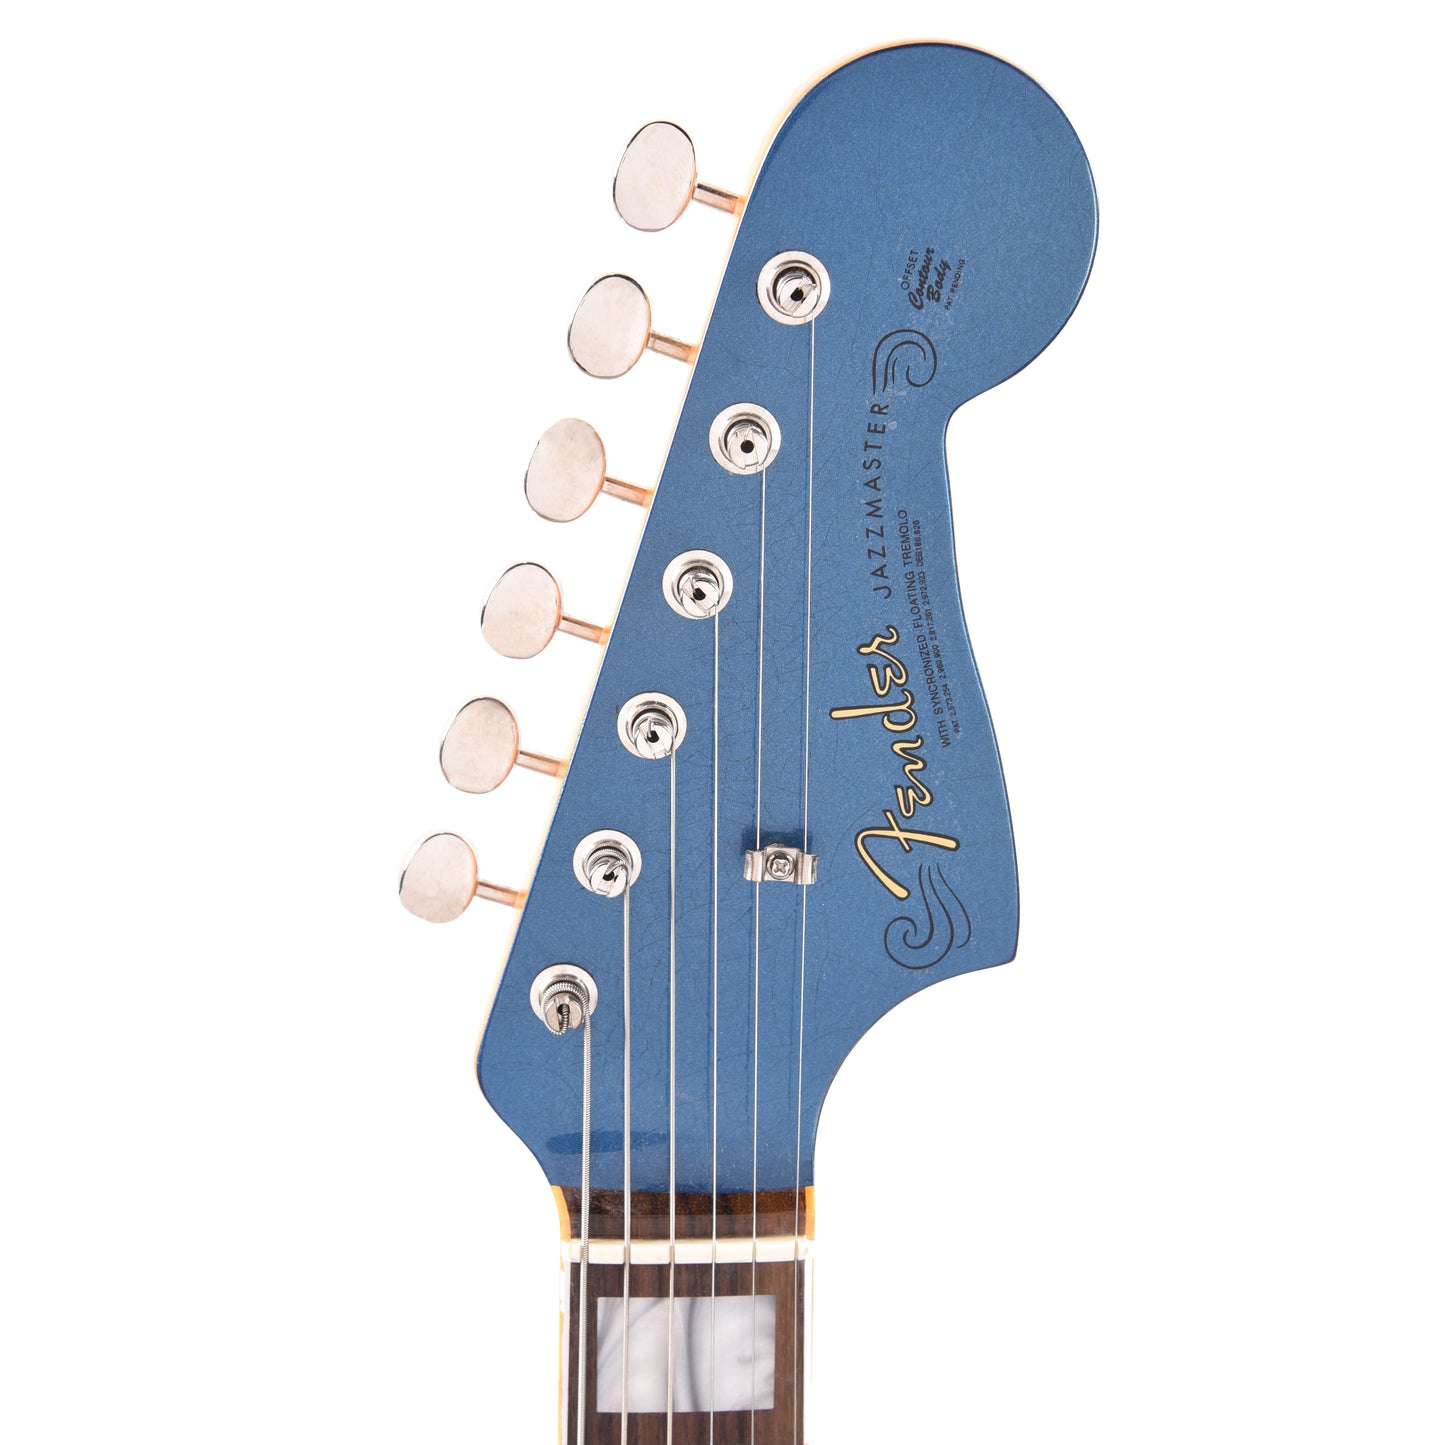 Fender Custom Shop 1966 Jazzmaster "Chicago Special" Deluxe Closet Classic Faded/Aged Baltic Blue w/Matching Headcap